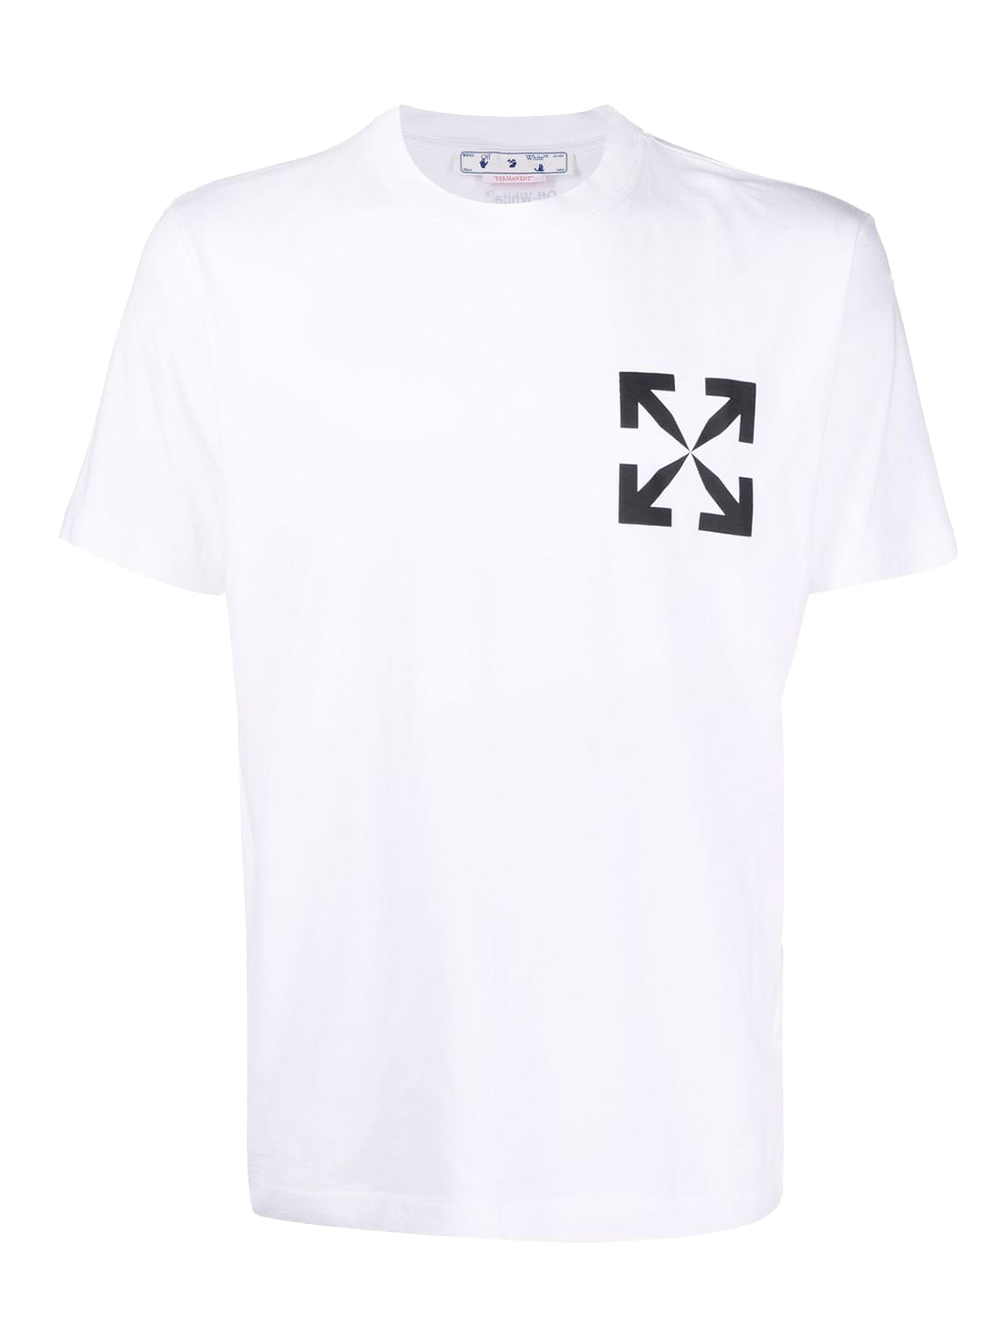 OFF-WHITE Kiss 21 Print Over-Fit T-shirt Black